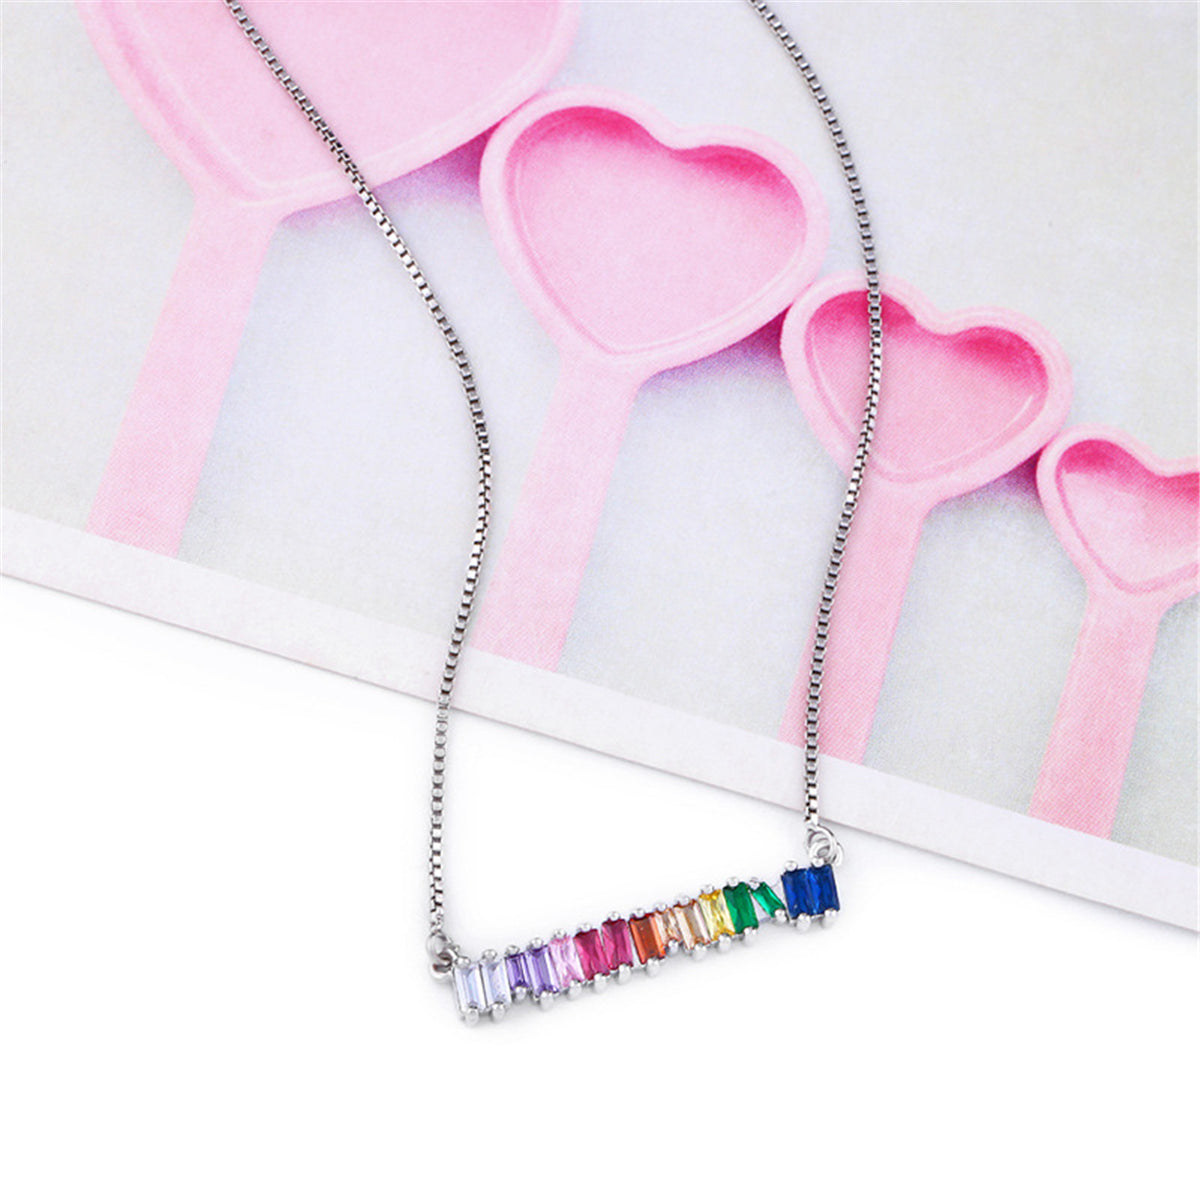 Crystal & Silver-Plated Bar Pendant Necklace